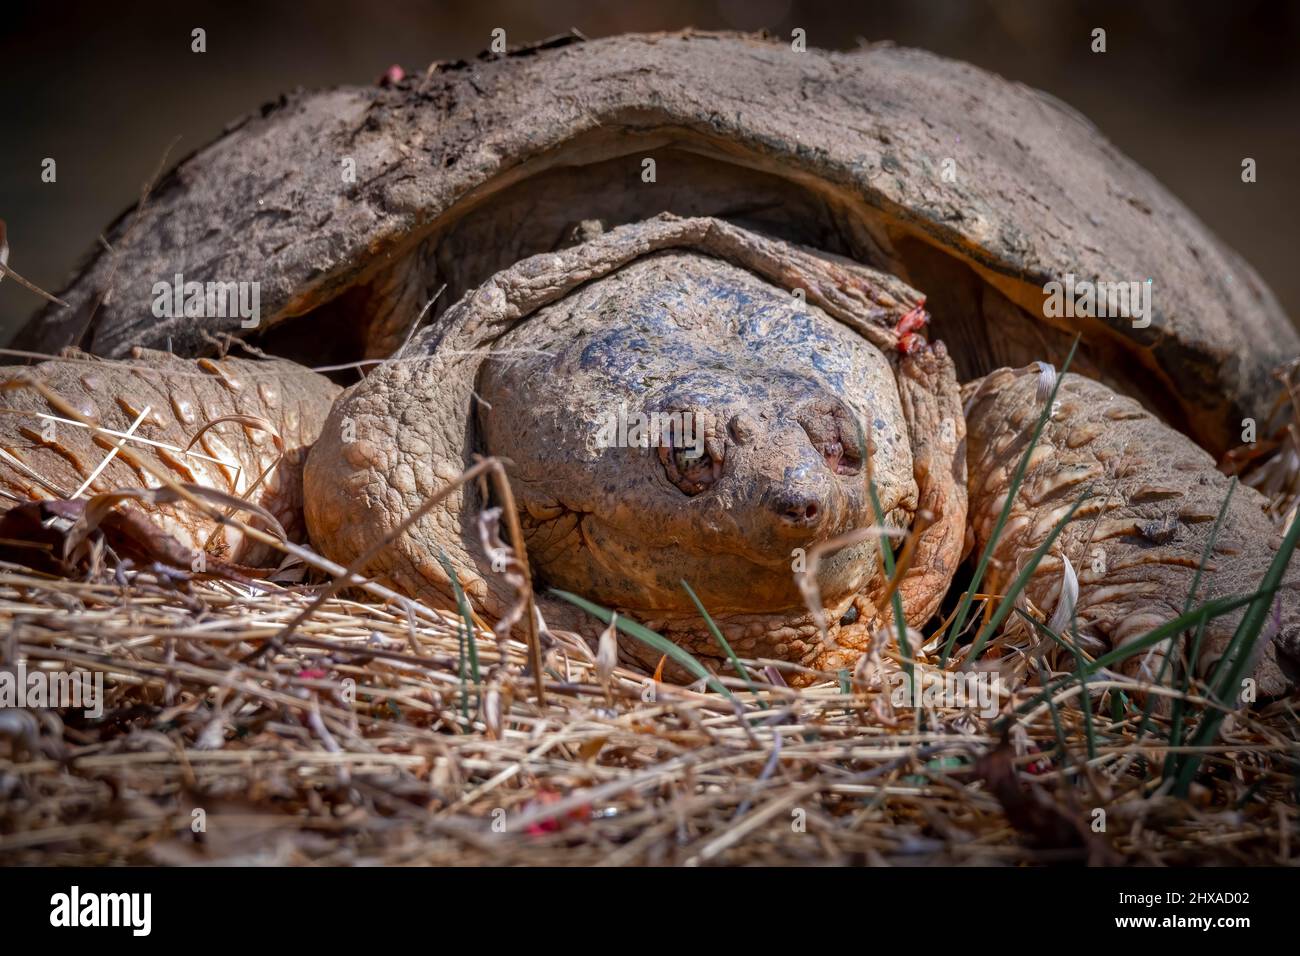 Front view of an aged Common Snapping Turtle sunning on the creek bank. Raleigh, North Carolina. Has injured eye and neck. Stock Photo